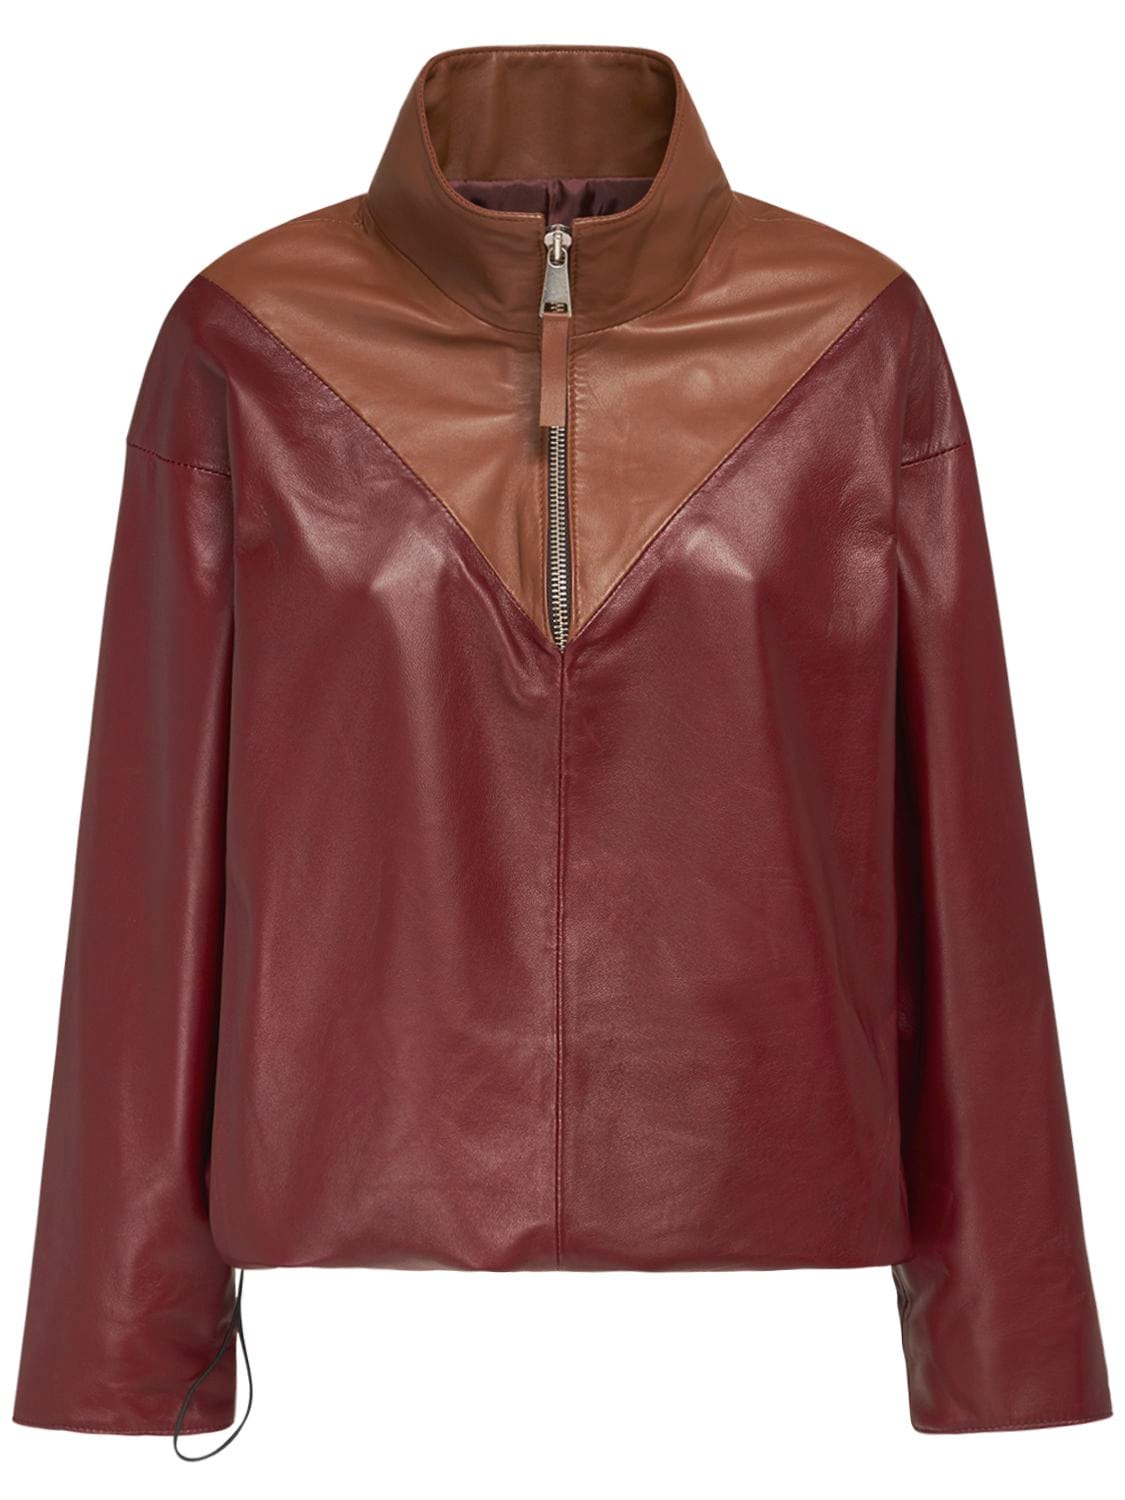 Nynne Avery Two Tone Leather Top In Burgundy,camel